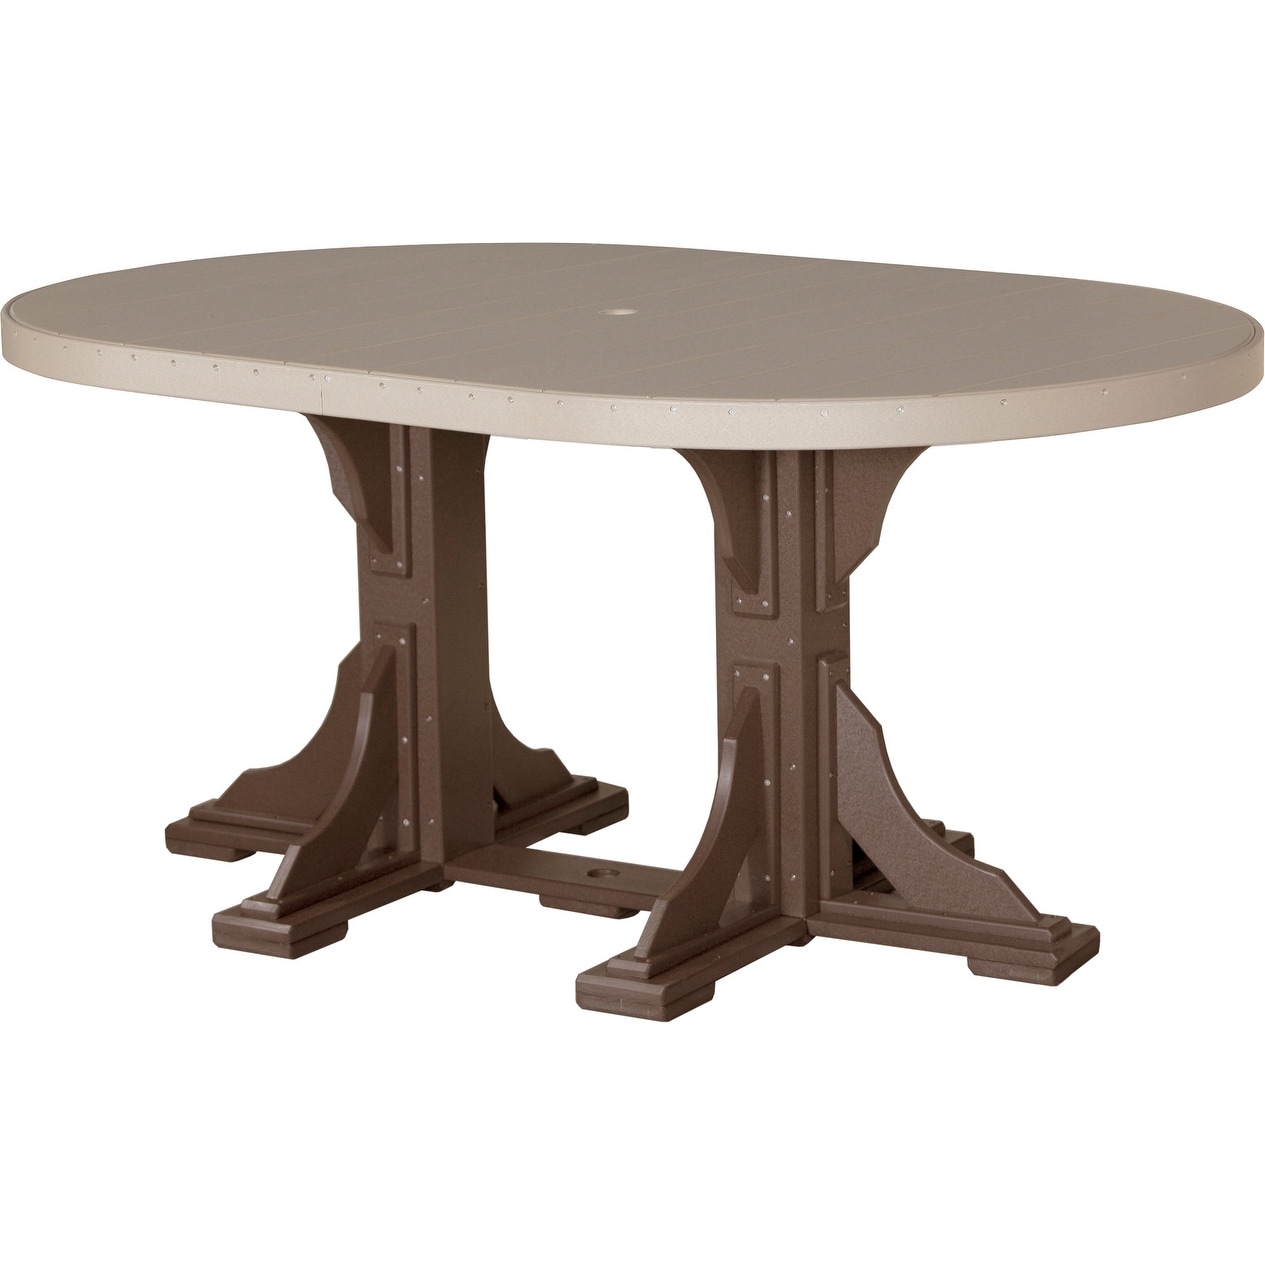 Poly Lumber Round Dining Table Set With Island Chairs